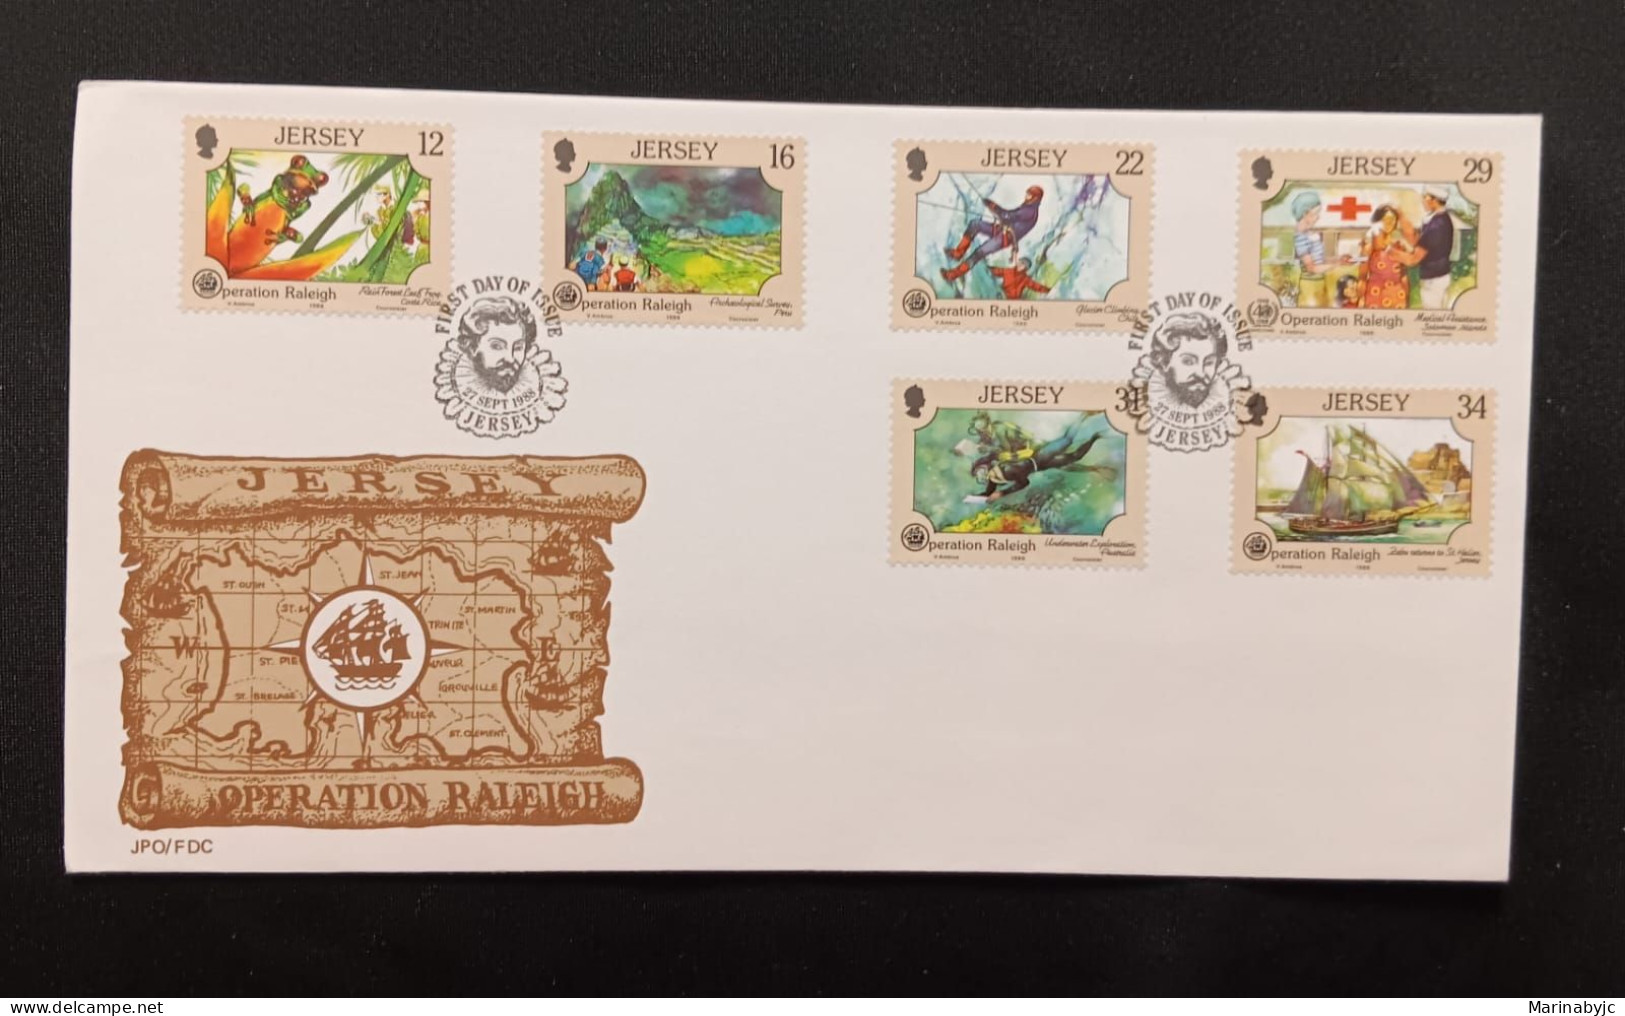 DM)1988, JERSEY, FIRST DAY COVER, ISSUE, OPERATION RALEIGH, OPERATION AID FOR NATURE, FROG LEMUR, COSTA RICA, ARCHEOLOGY - Jersey